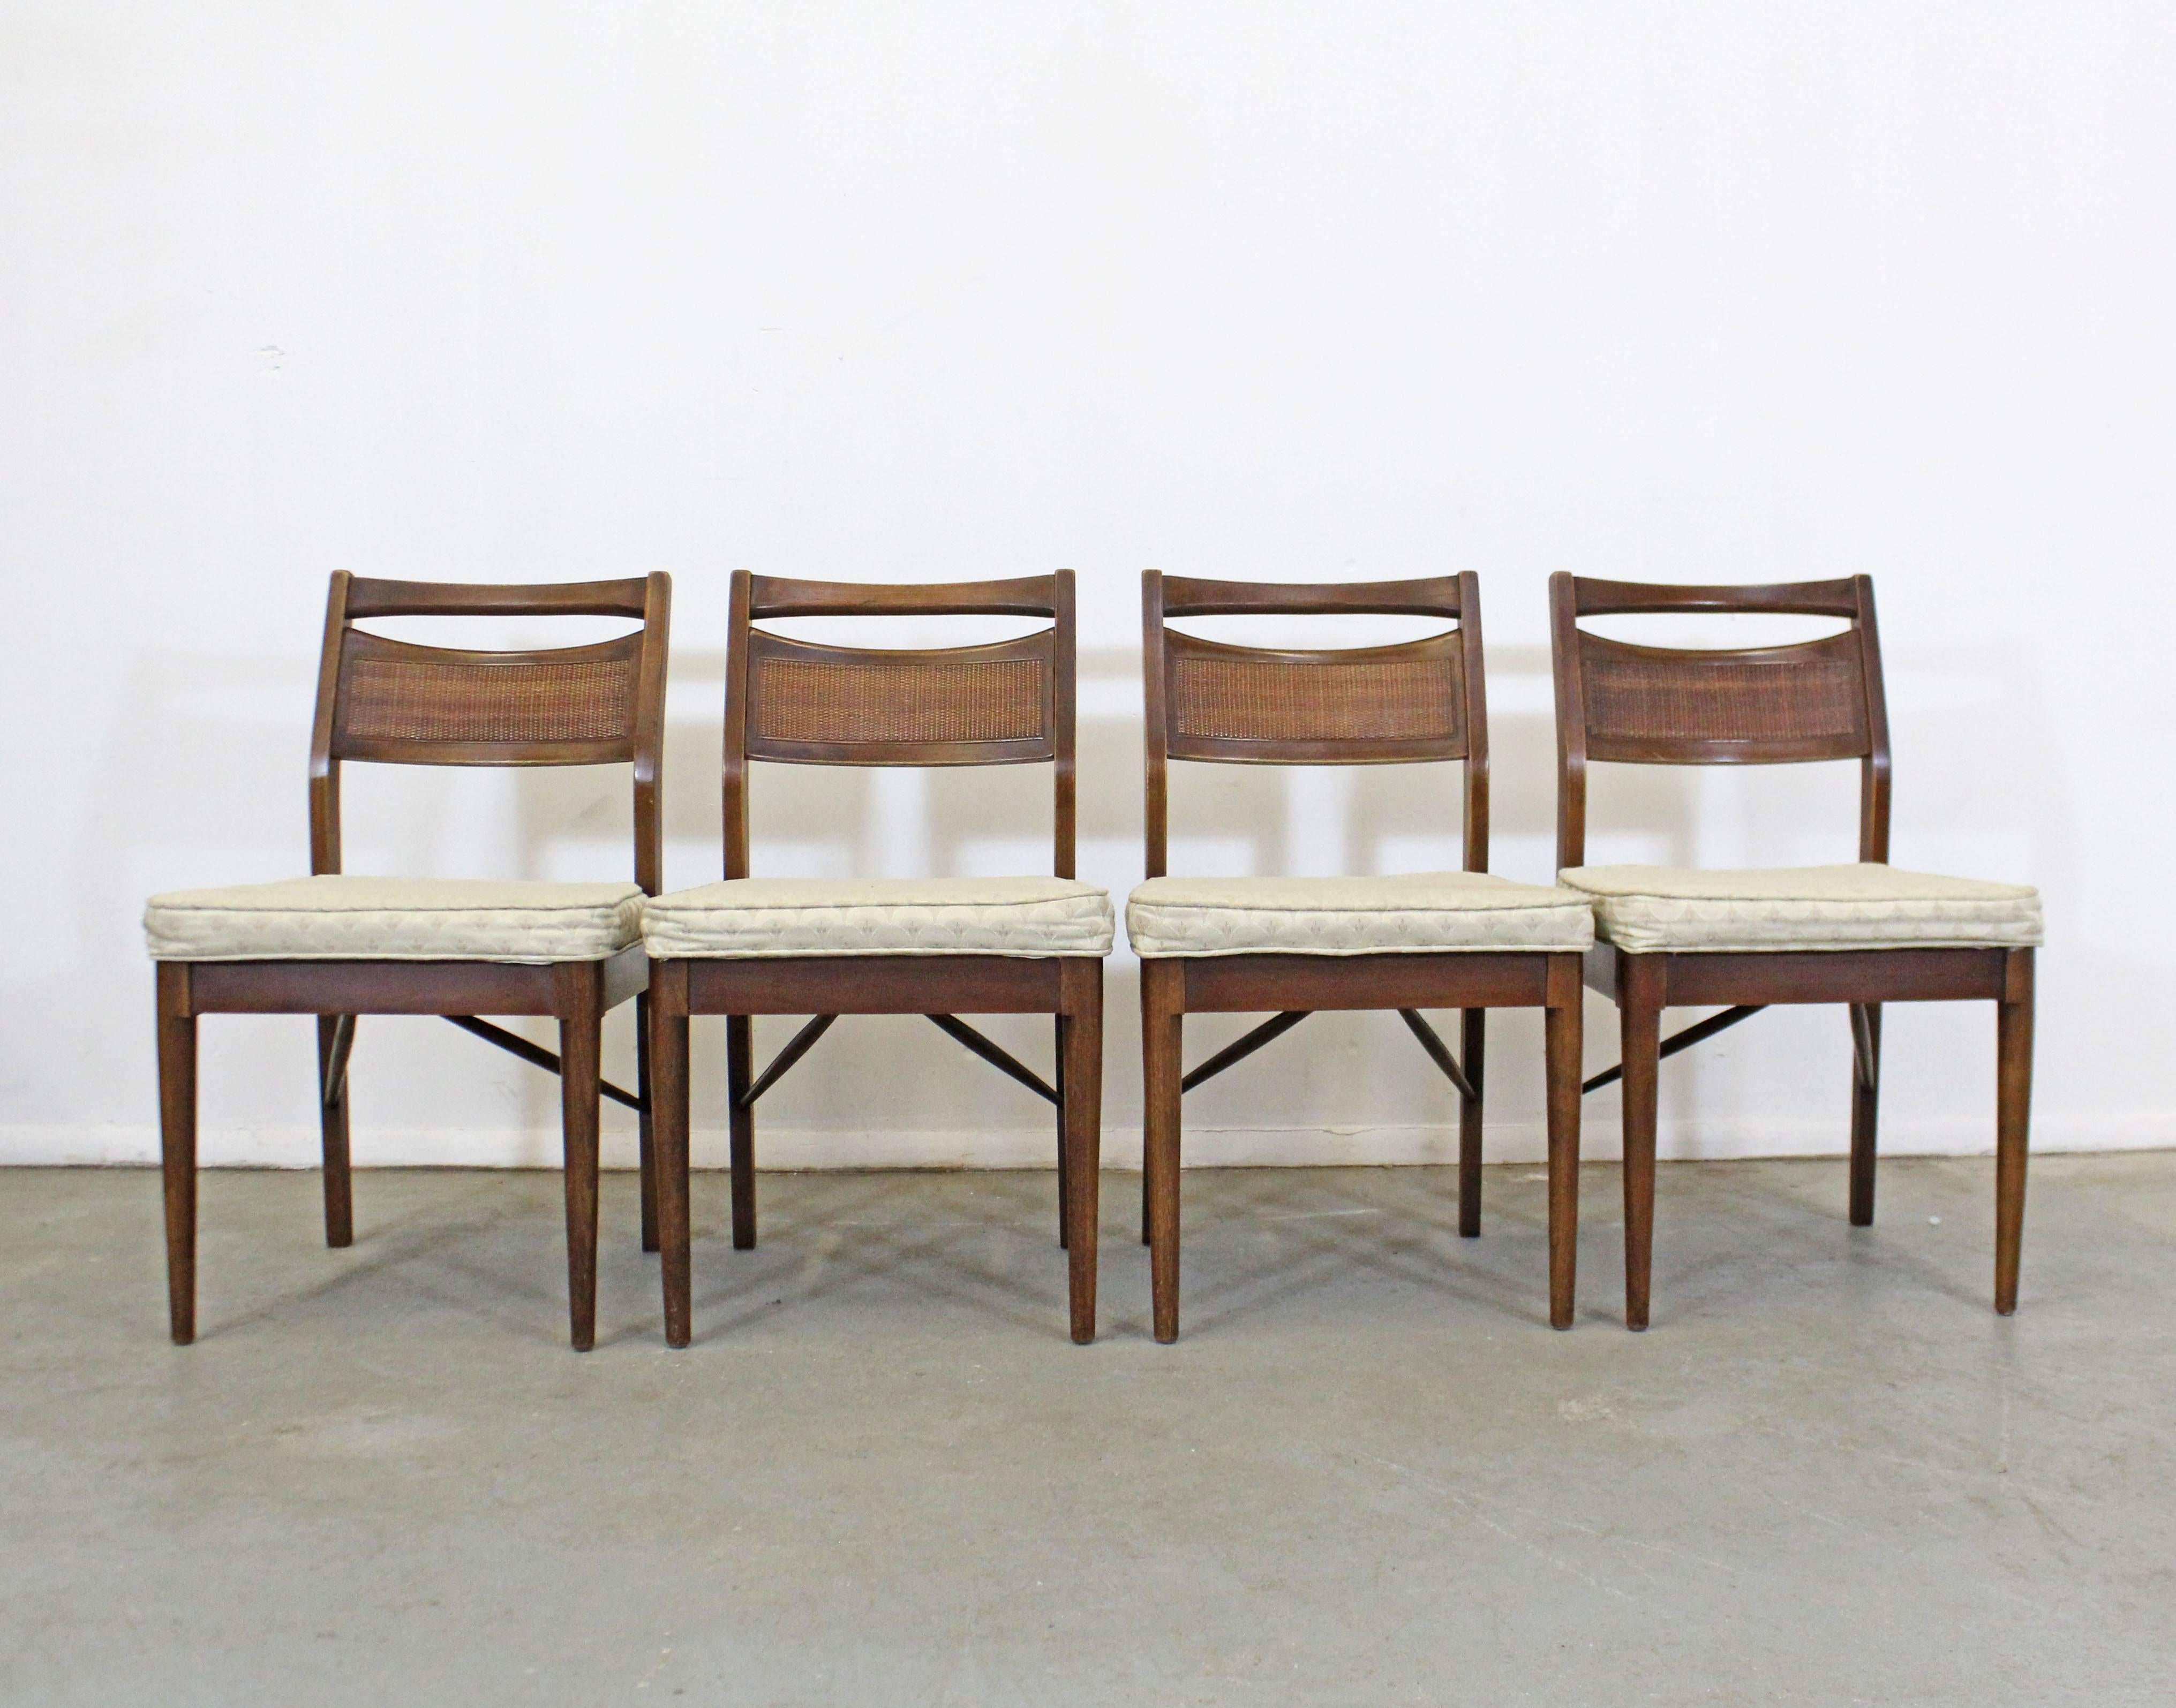 What a find. Offered is a vintage mid-century modern chair set by American of Martinsville. They are made of walnut with caned backs and upholstered seats. They are in structurally sound condition, showing normal age wear including stains on the